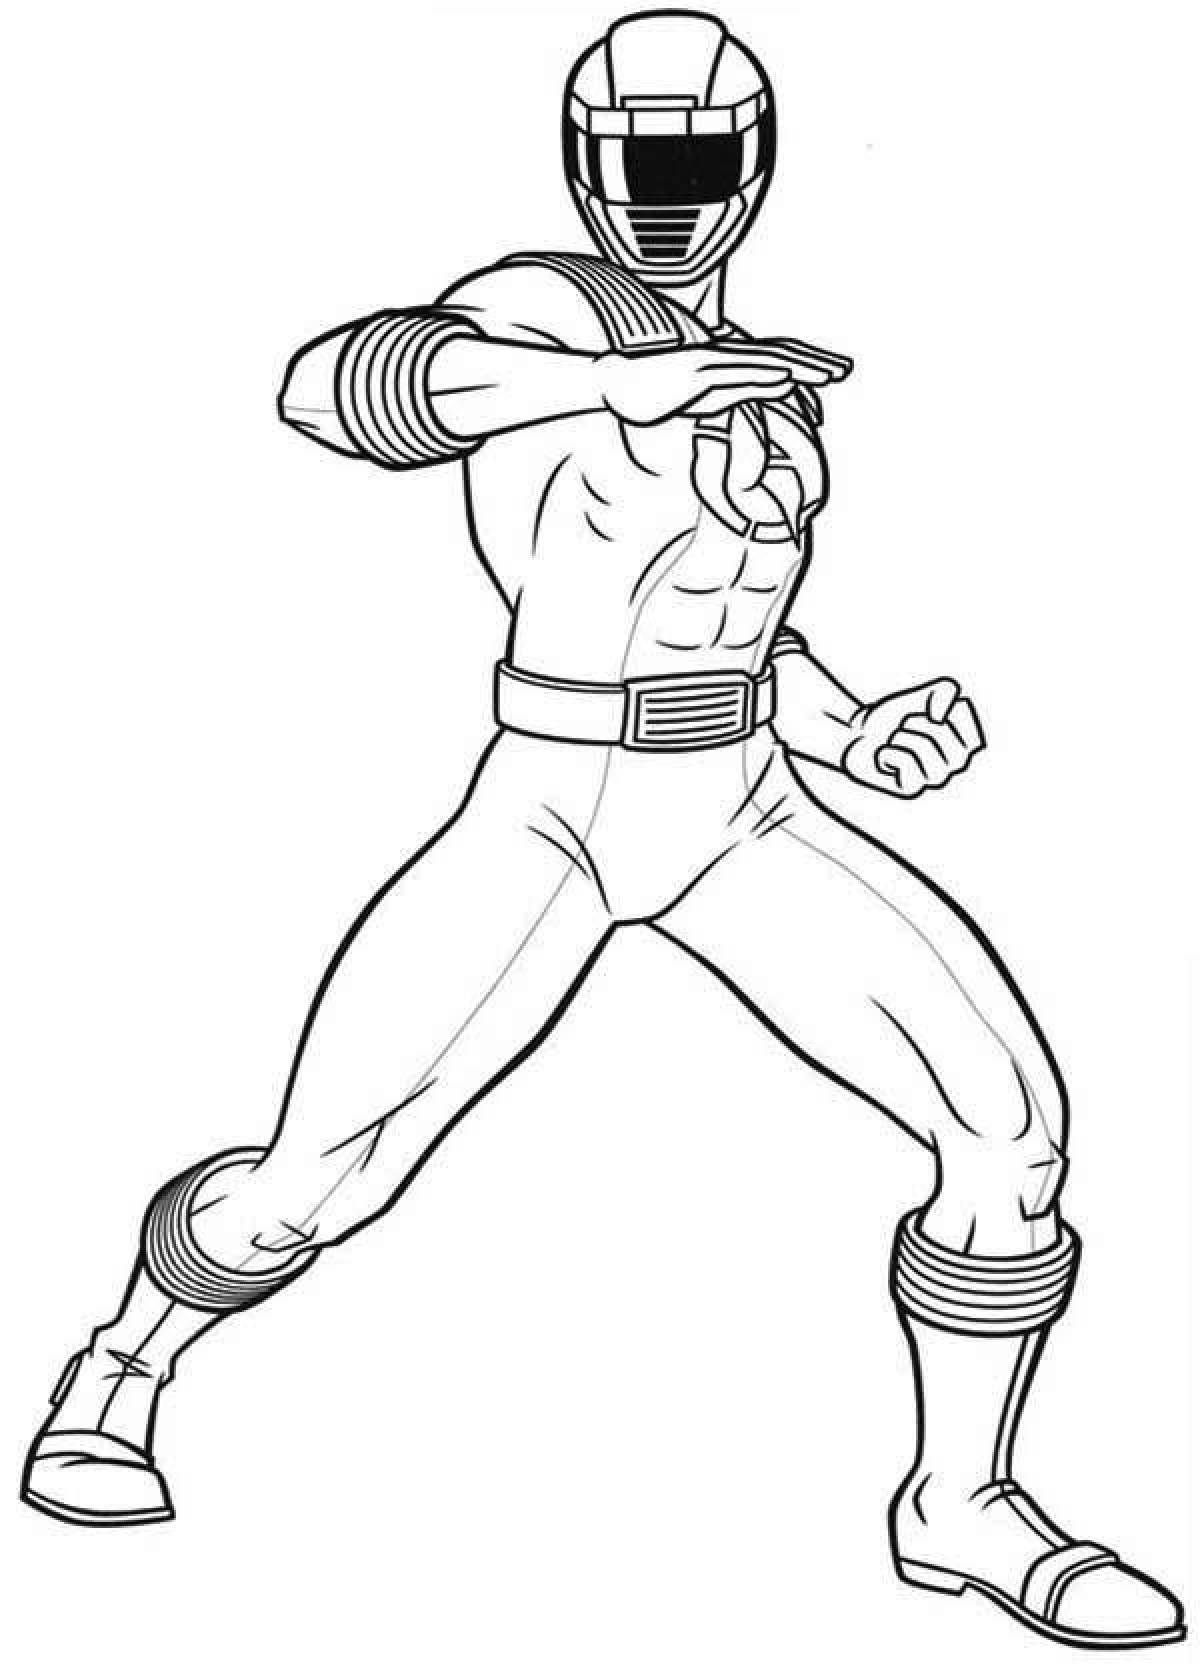 Colorful power rangers ninja storm coloring page